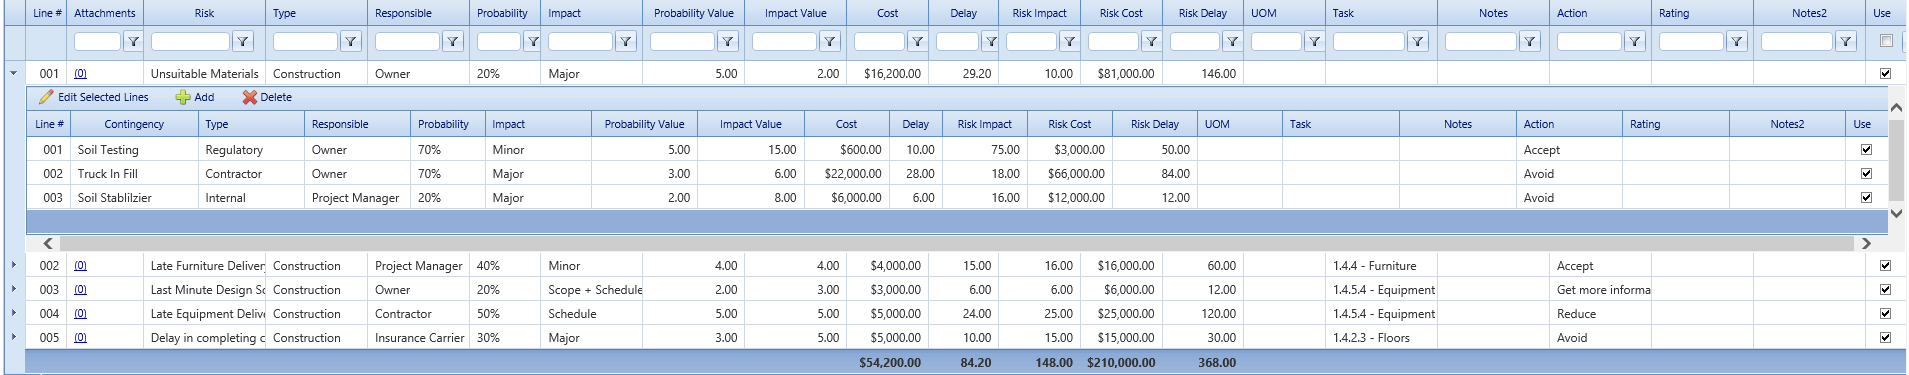 4. Risk Analysis Details Tab Table